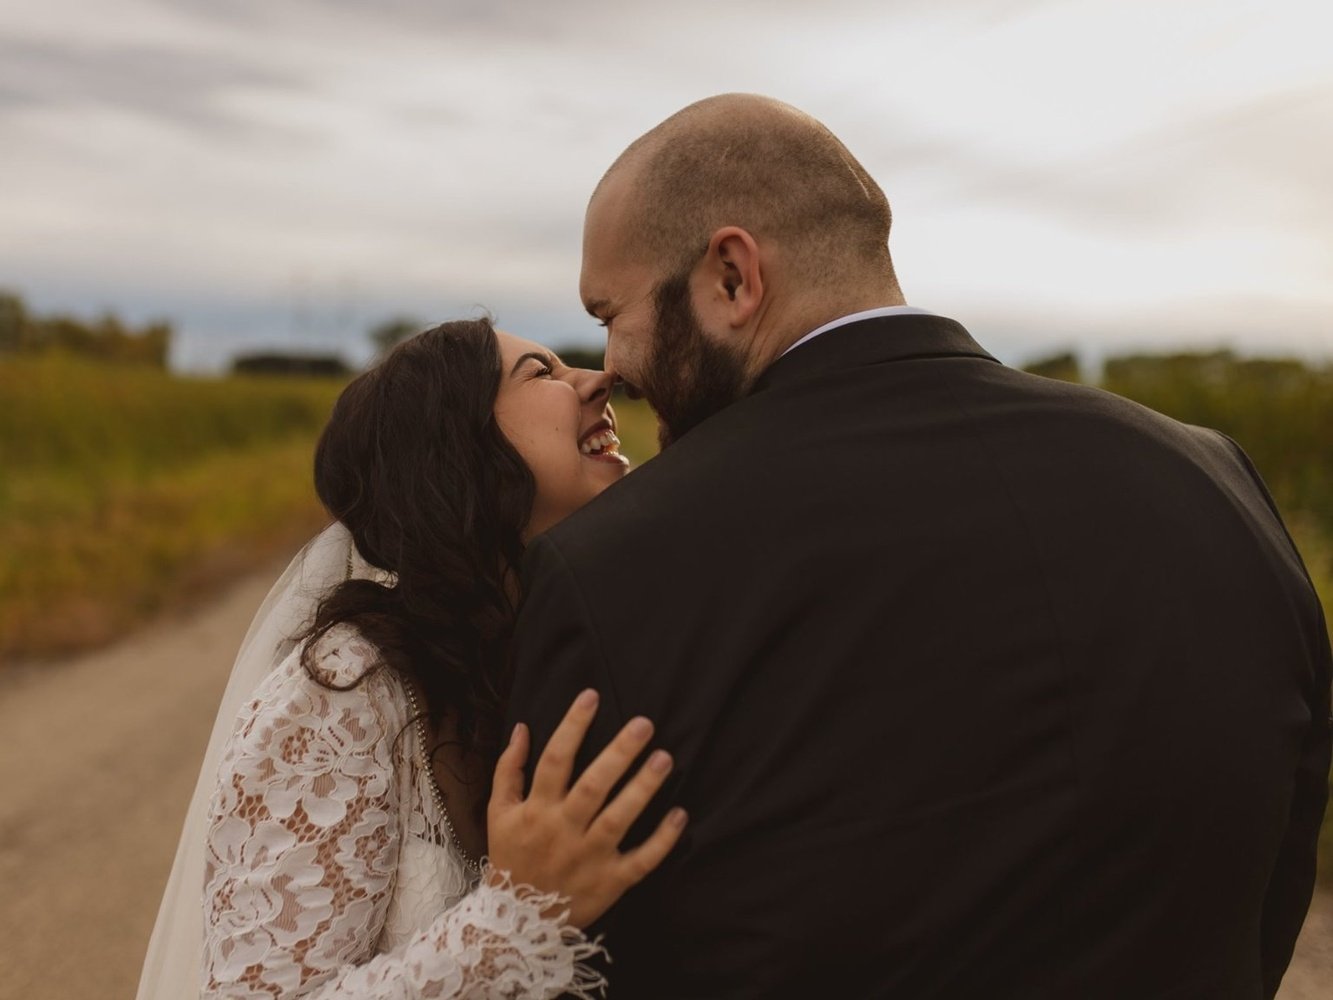 Couple Pays $800 To Wedding Photographer, Left With "Dark, Grainy Images"